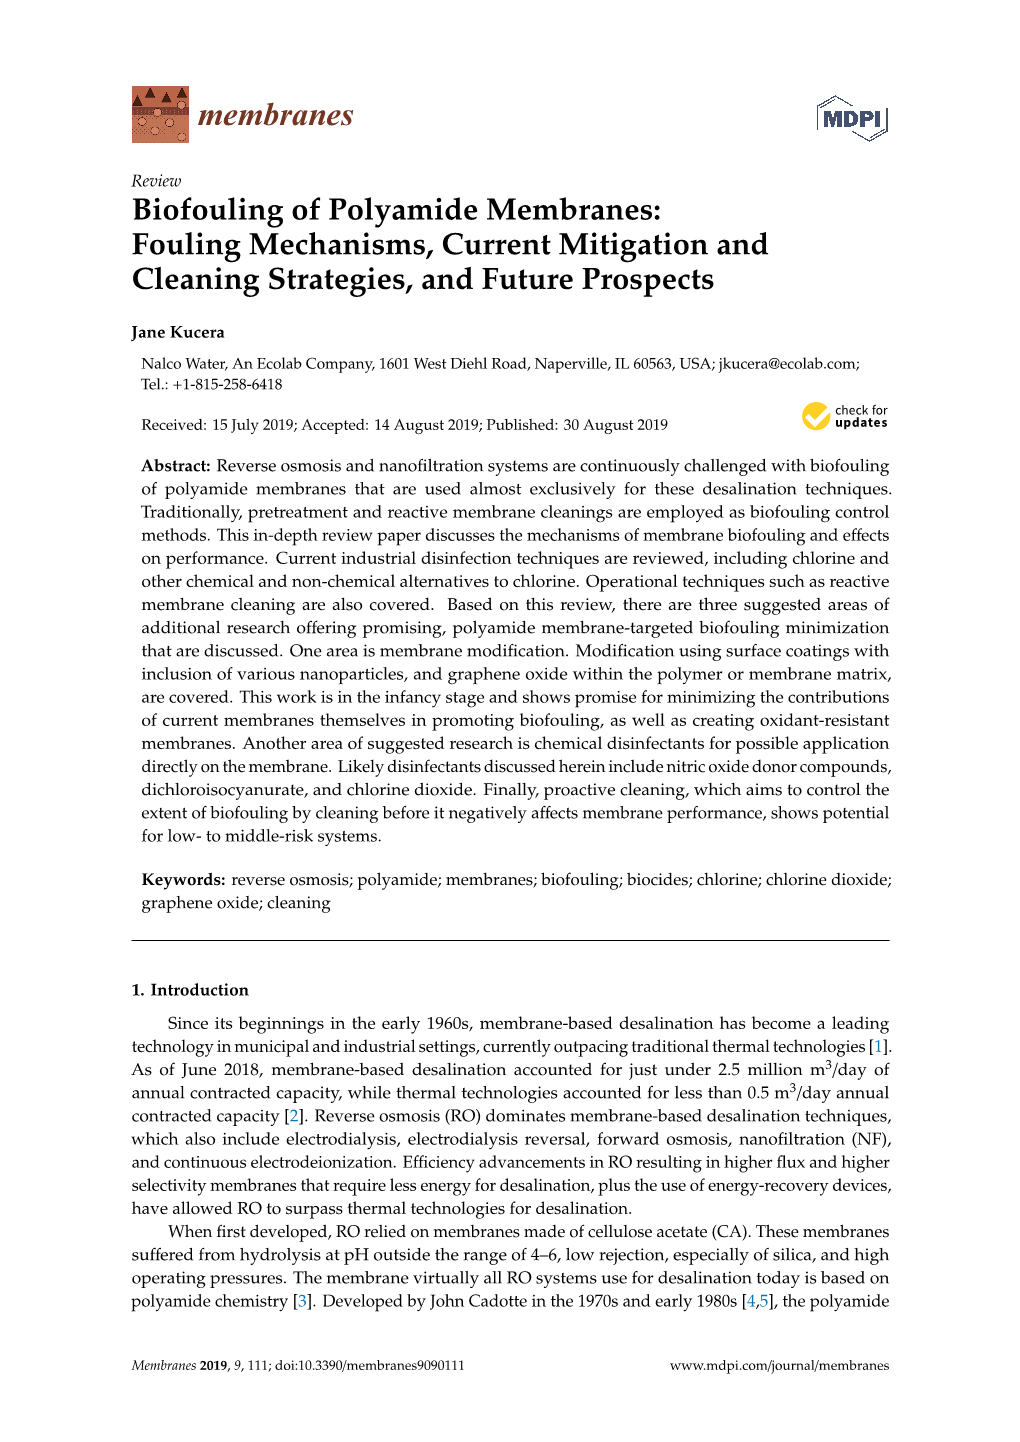 Biofouling of Polyamide Membranes: Fouling Mechanisms, Current Mitigation and Cleaning Strategies, and Future Prospects